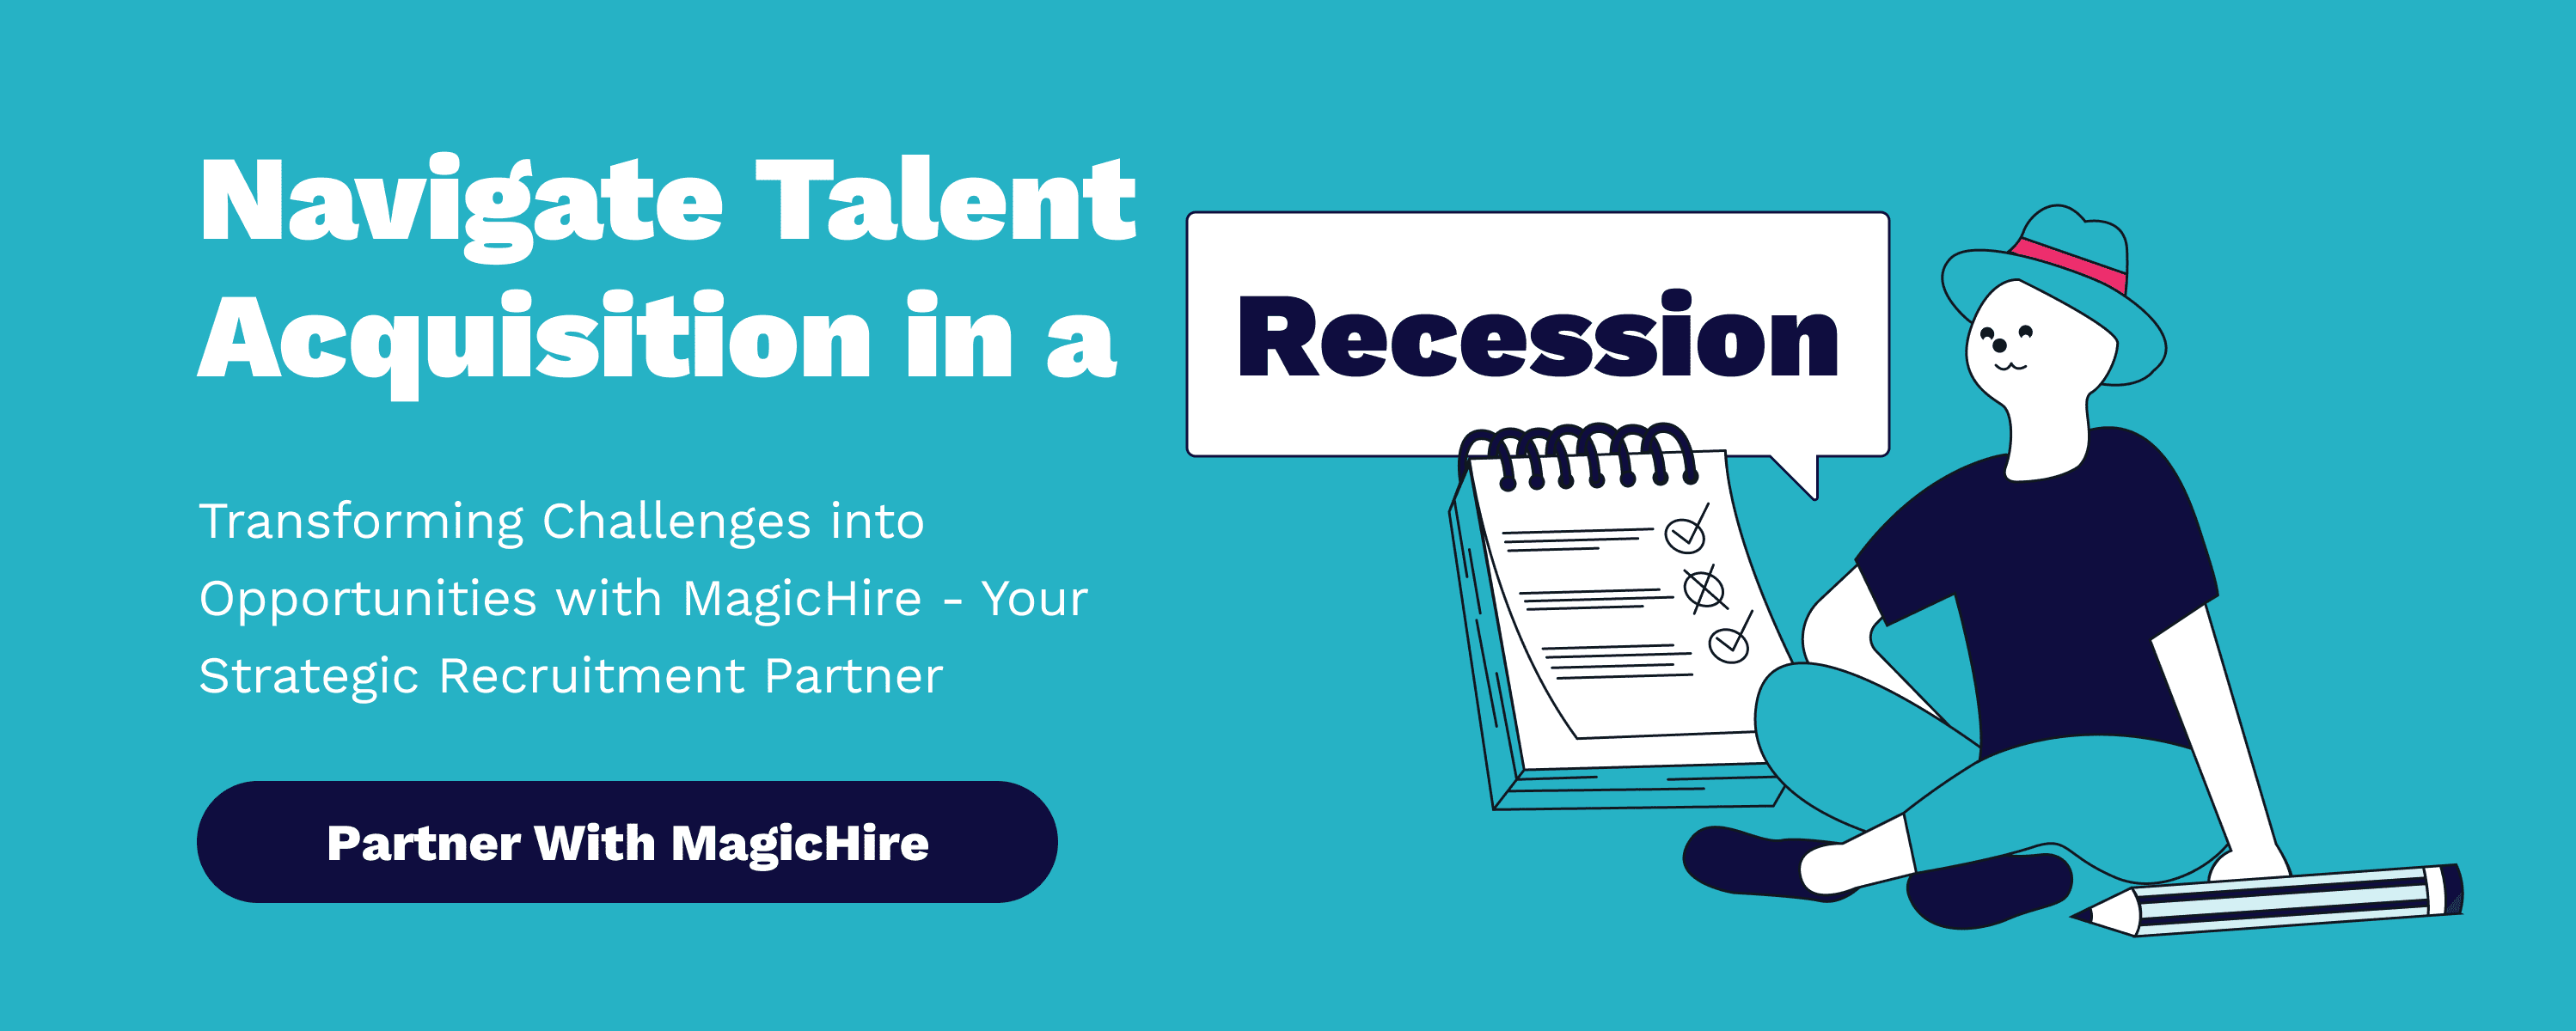 Managing Hiring During a Recession: Strategies for Talent Acquisition